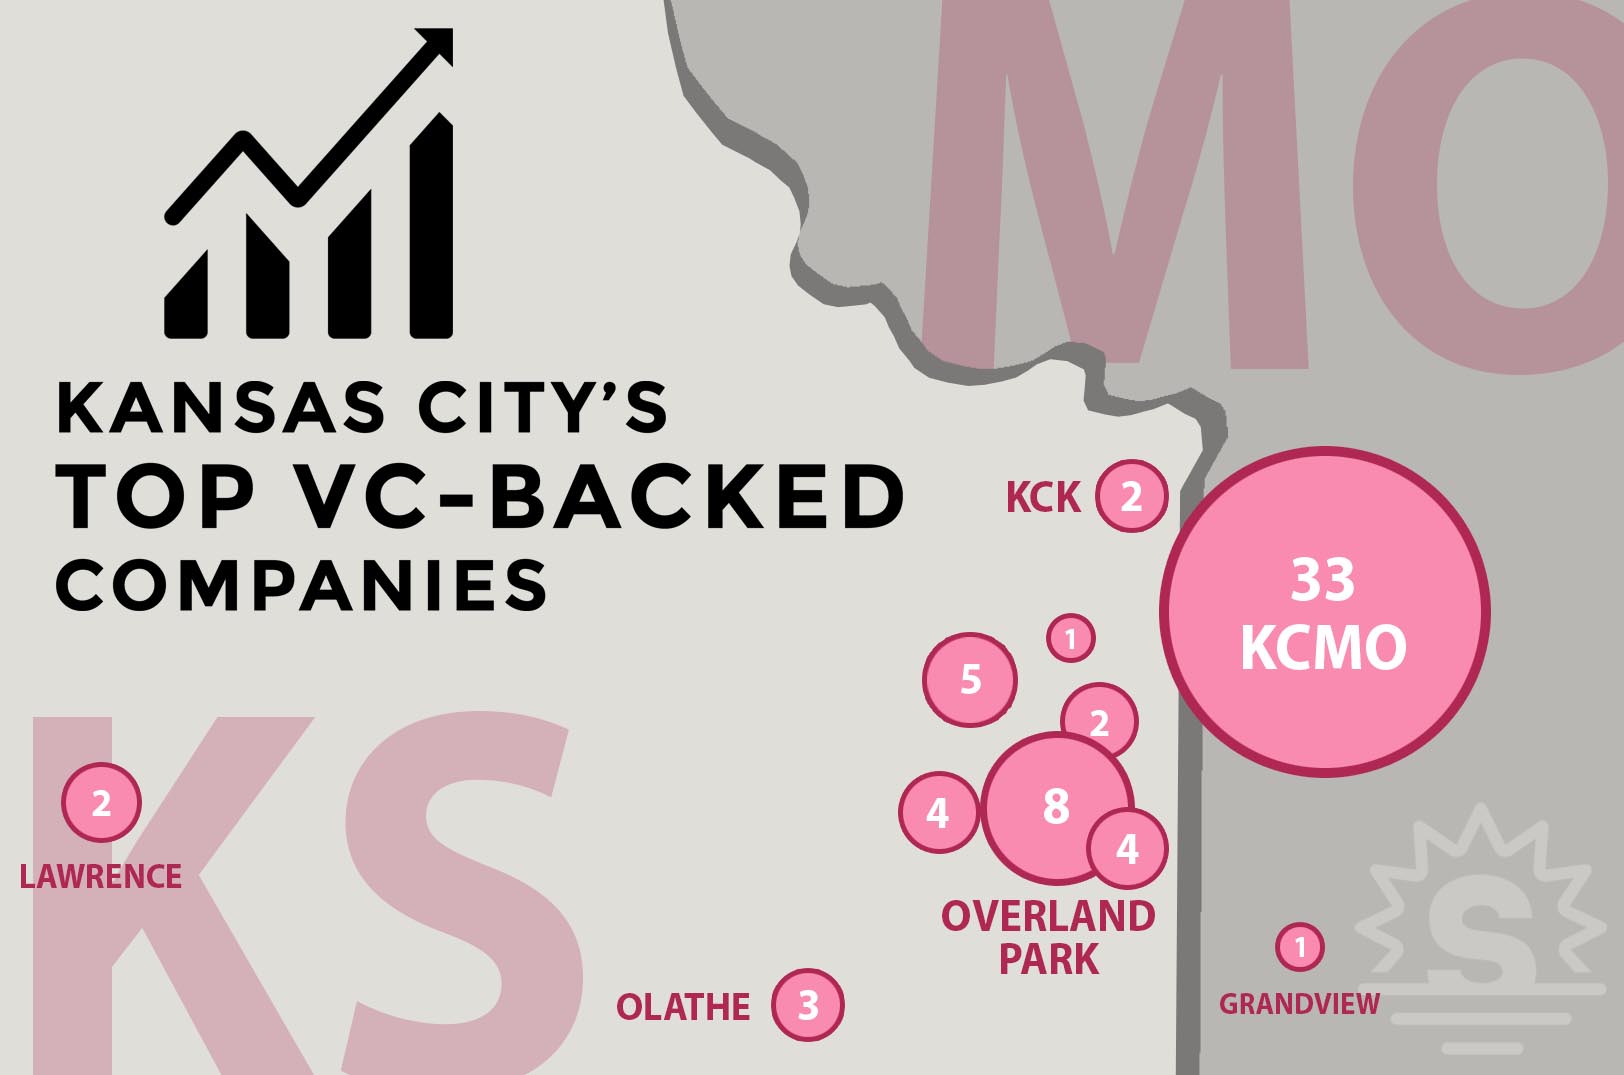 Kansas City’s Top VC-Backed Companies in 2020